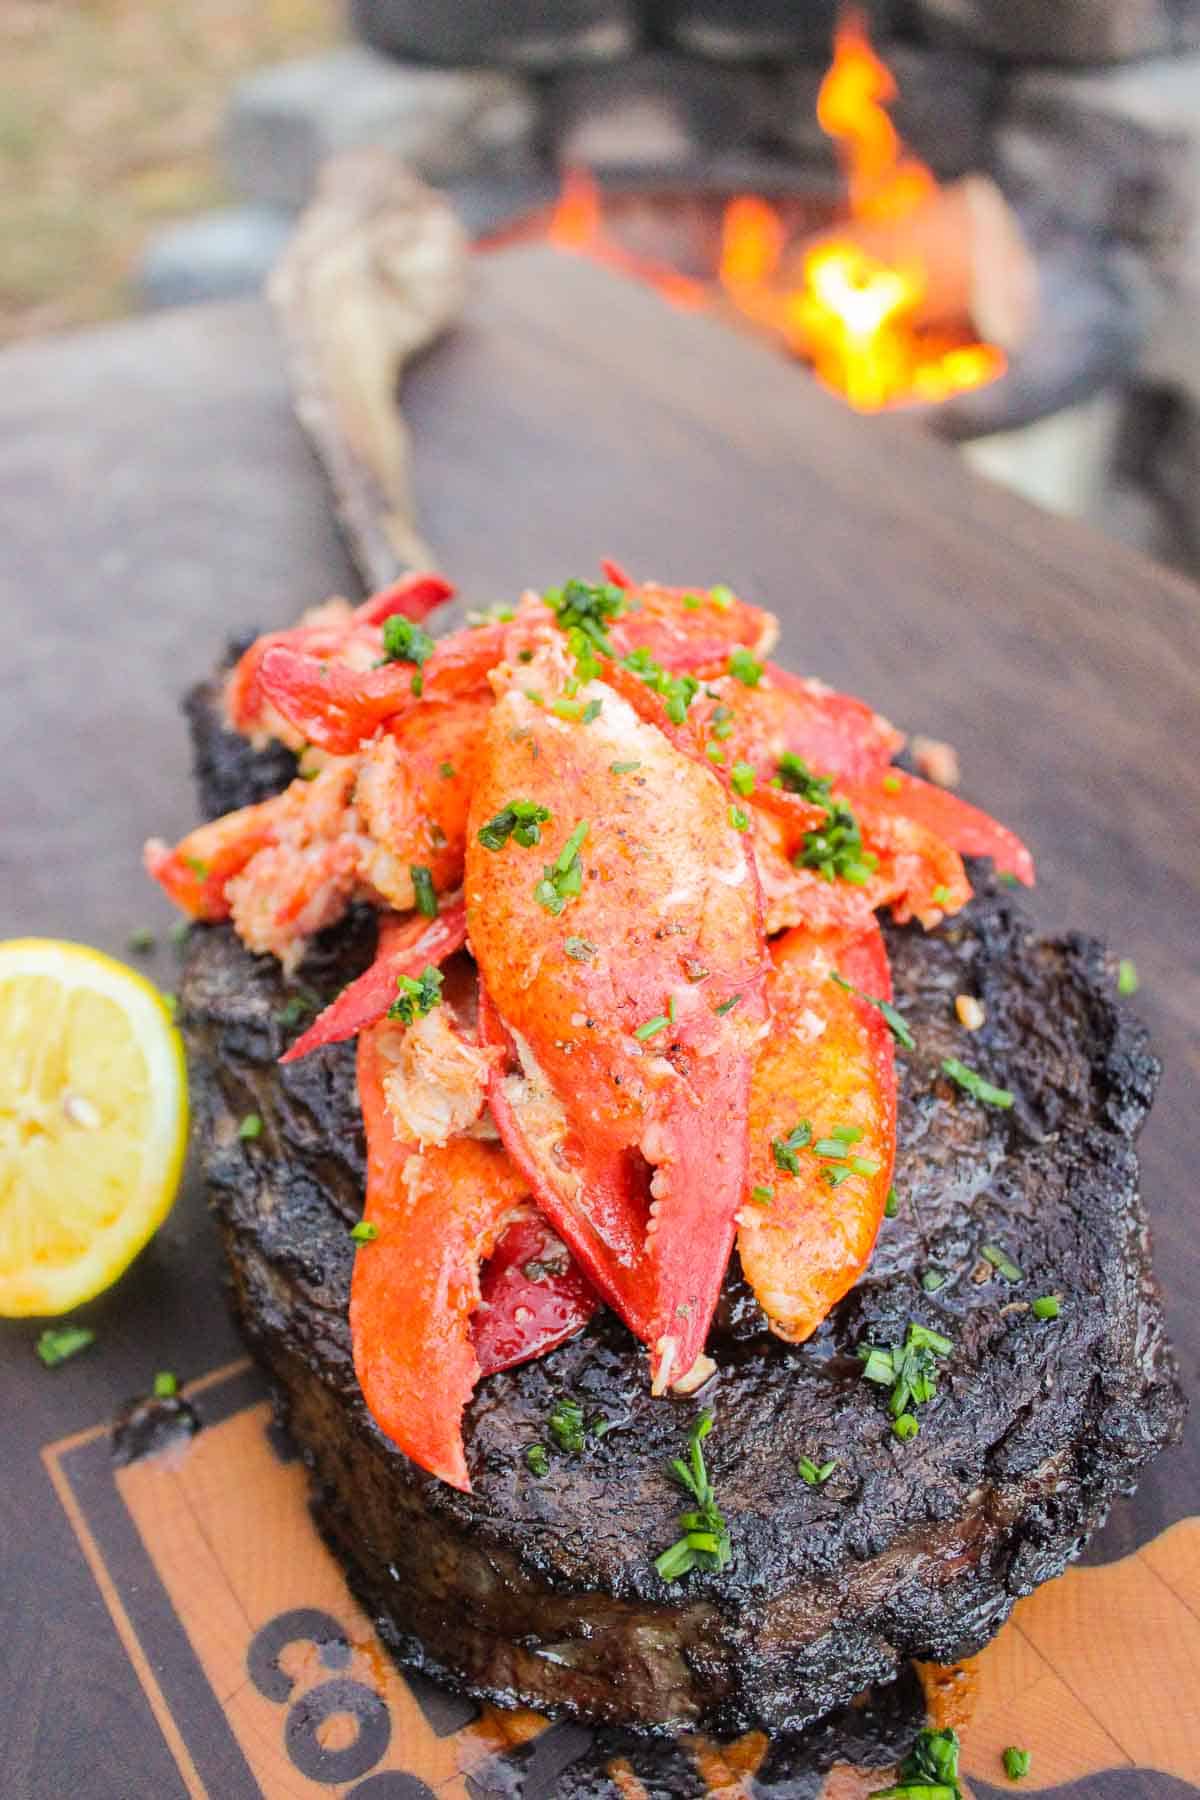 The Garlic Butter Lobster sitting on top of the tomahawk steak.